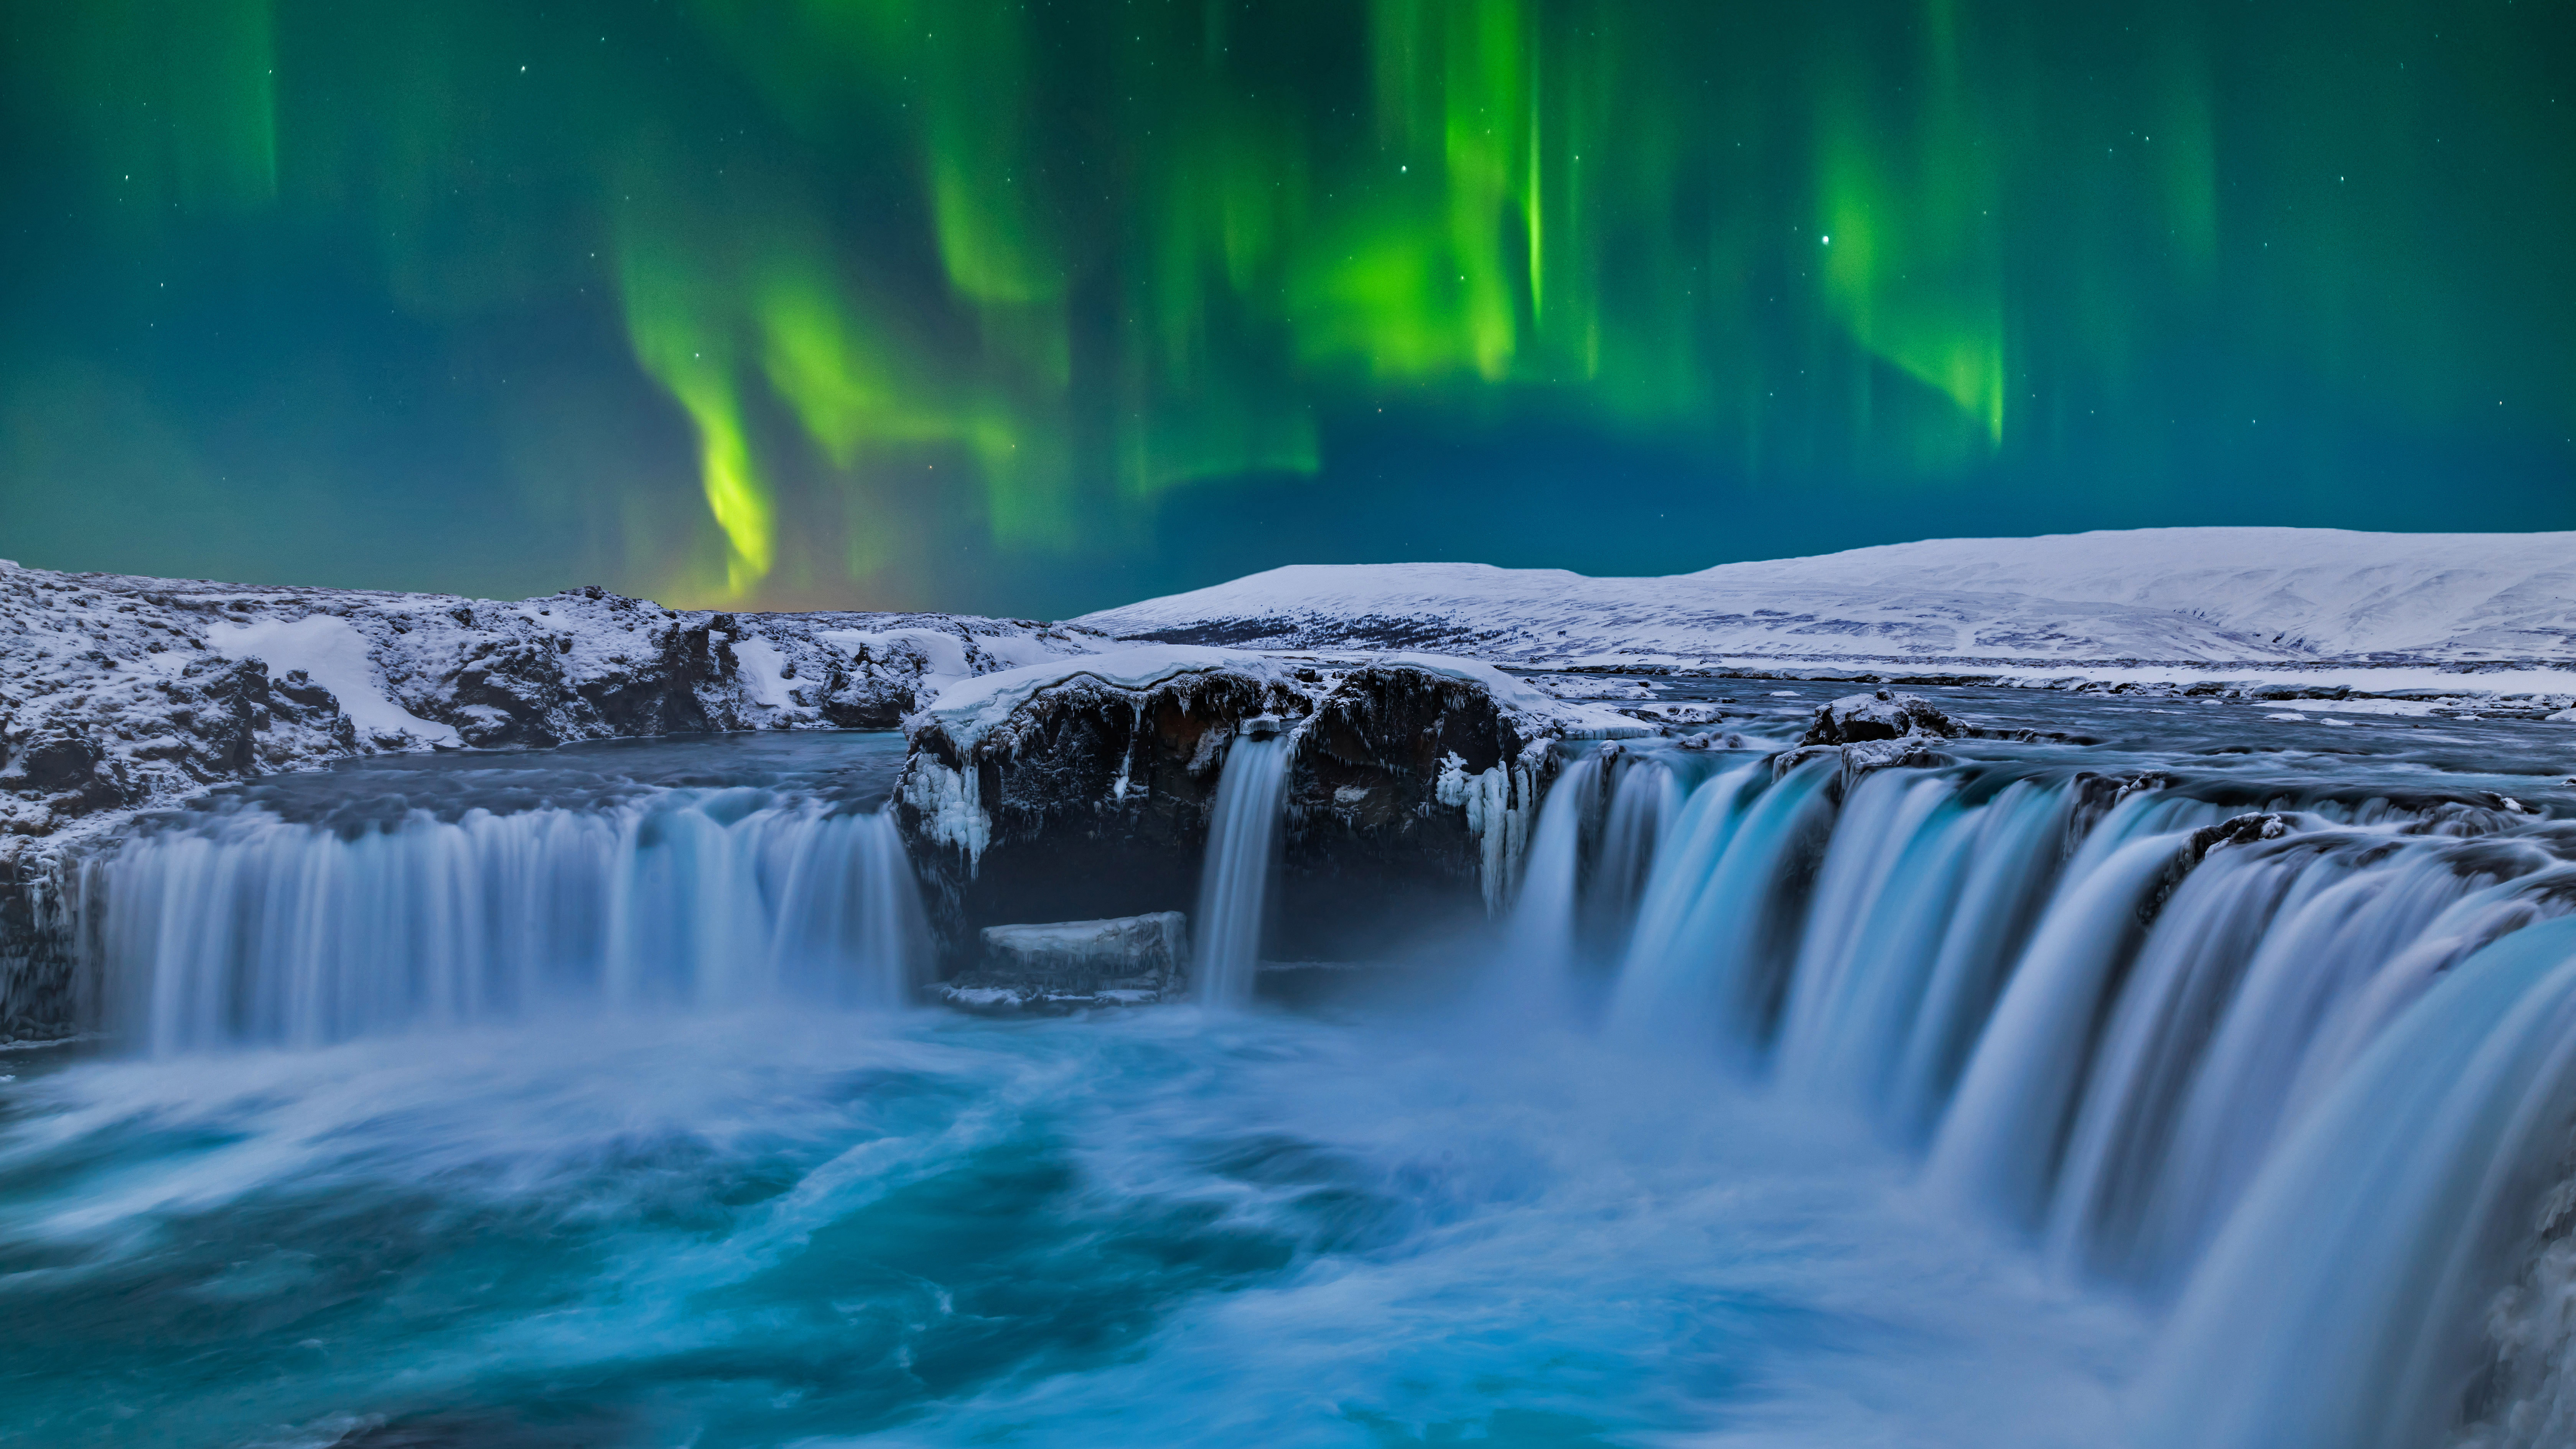 Goðafoss waterfall under the northern lights, Iceland by Anton Petrus